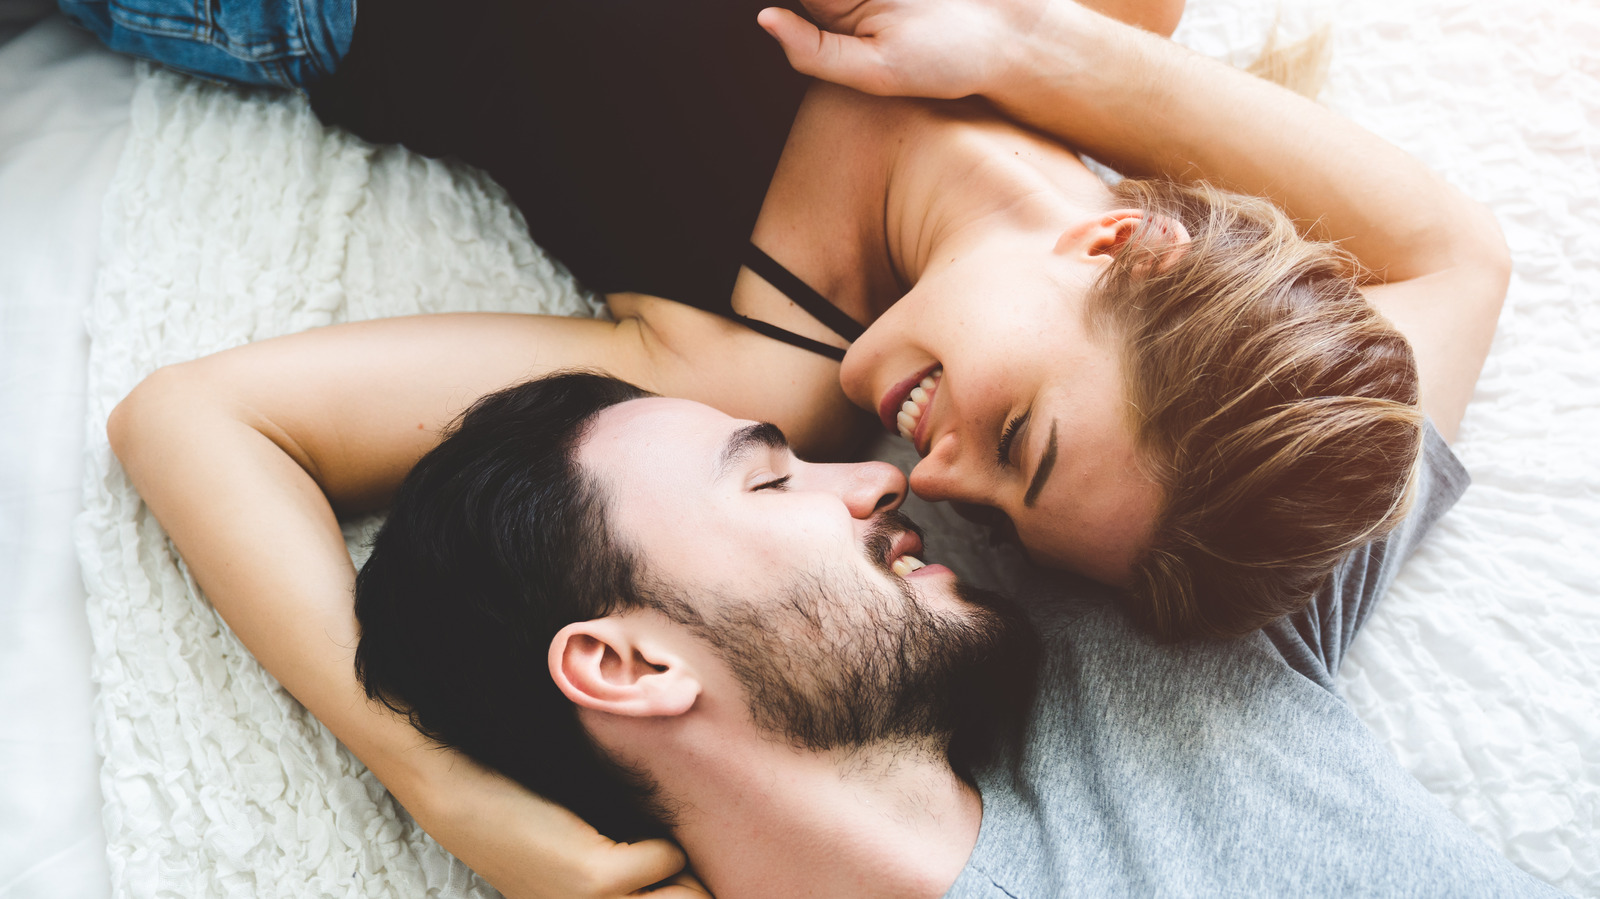 12 Reasons You Might Consider Scheduling An Appointment With A Sex Therapist – Glam